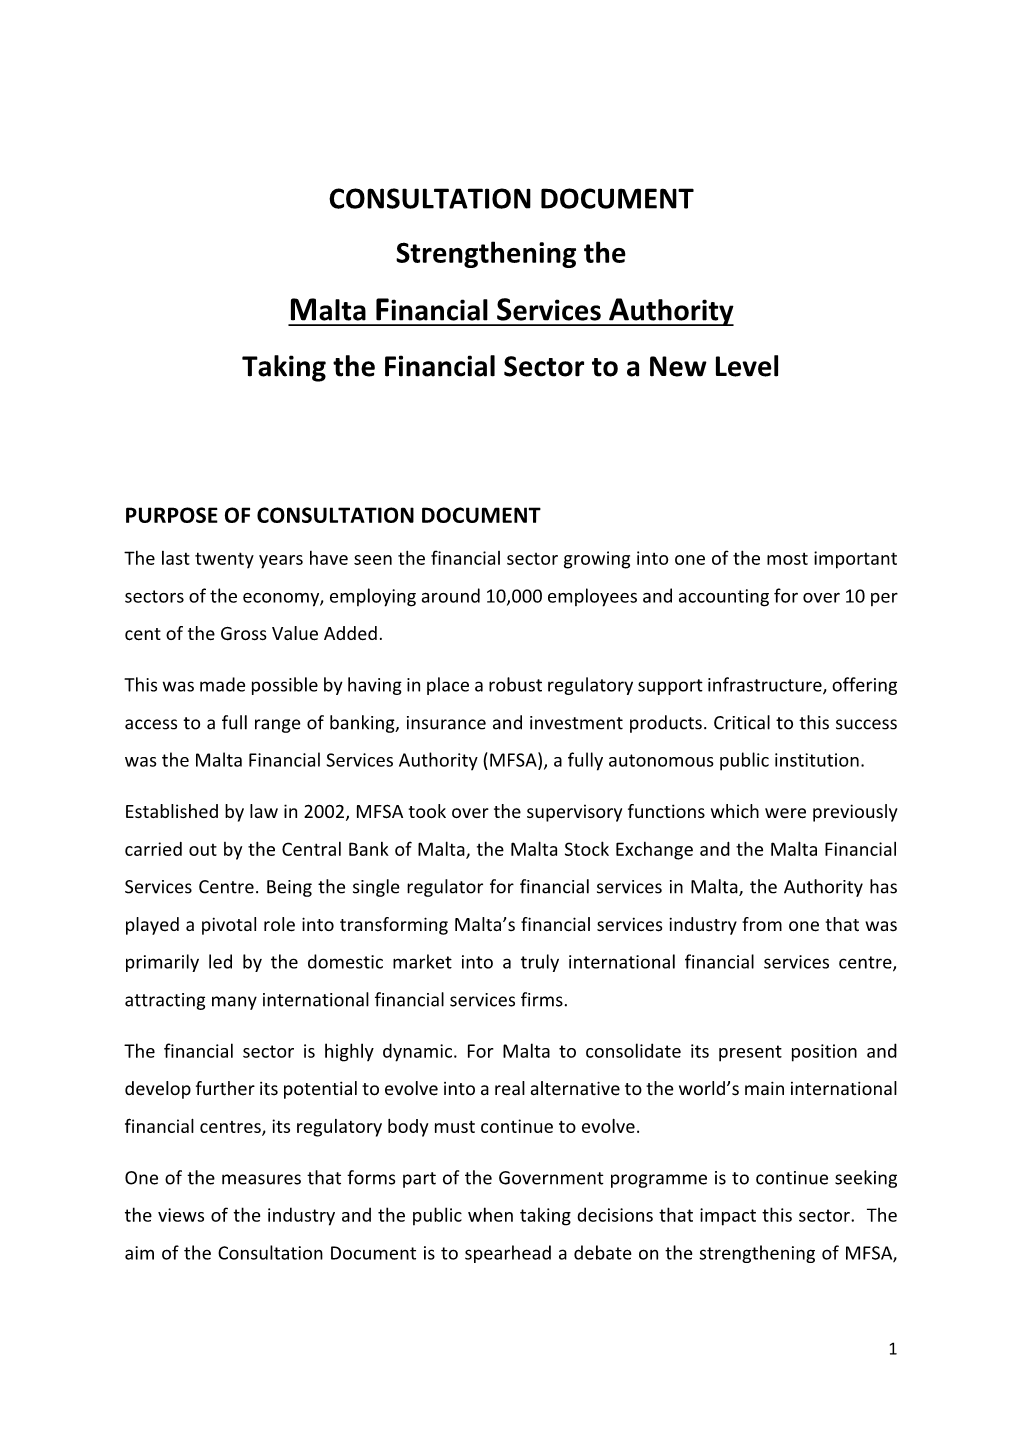 CONSULTATION DOCUMENT Strengthening the Malta Financial Services Authority Taking the Financial Sector to a New Level